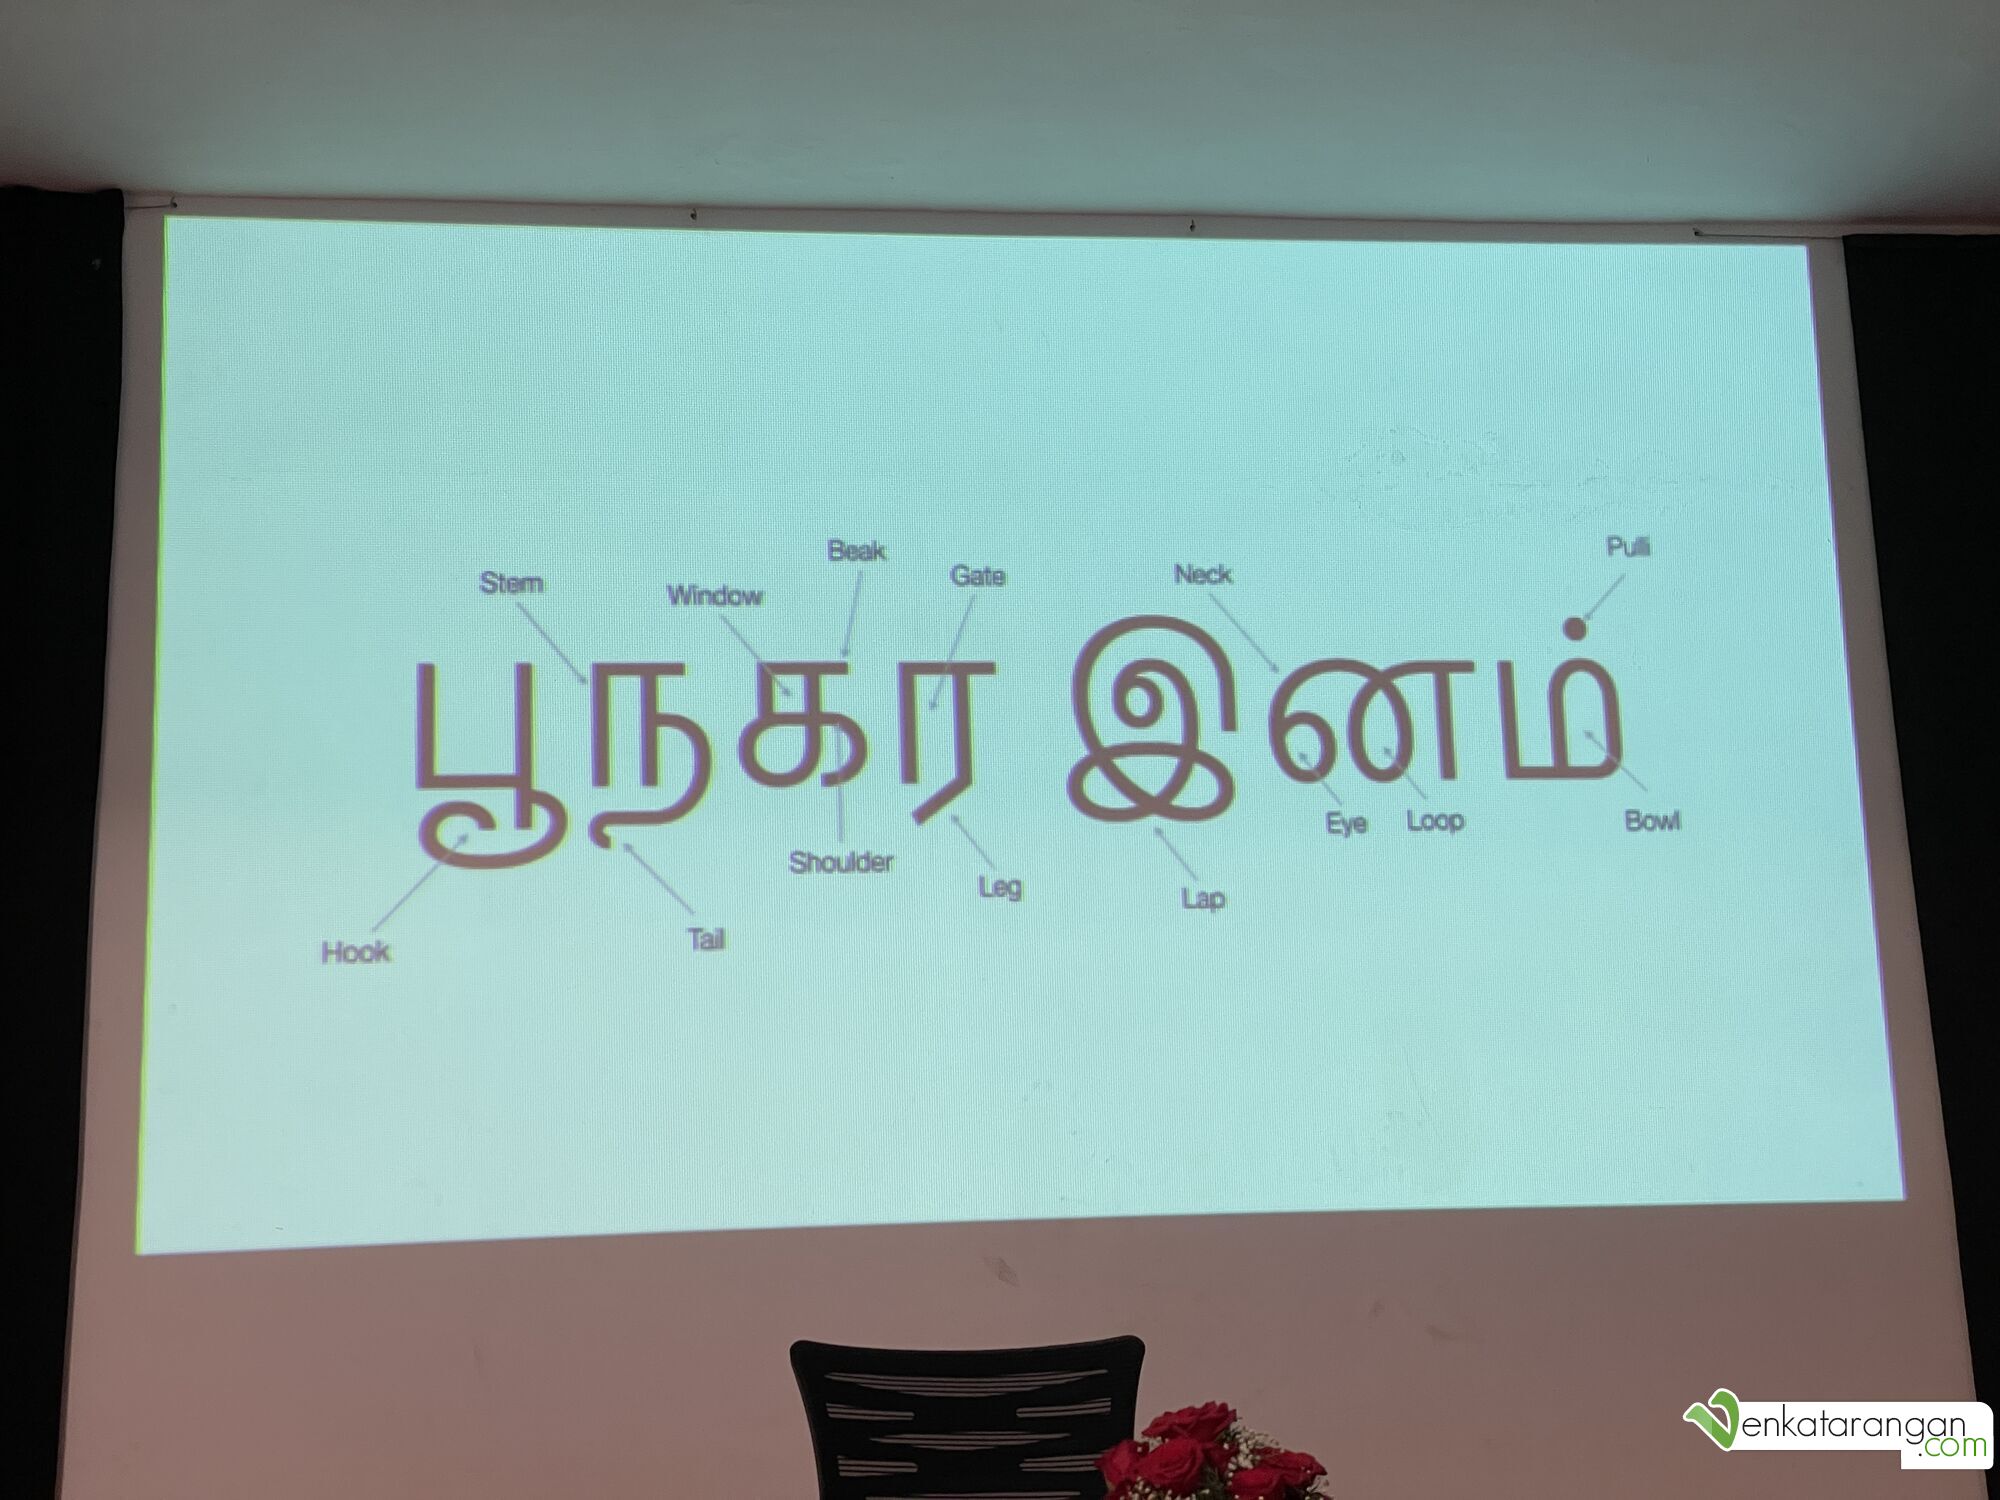 Mr. Tharique Azeez - Anatomy of Tamil letters